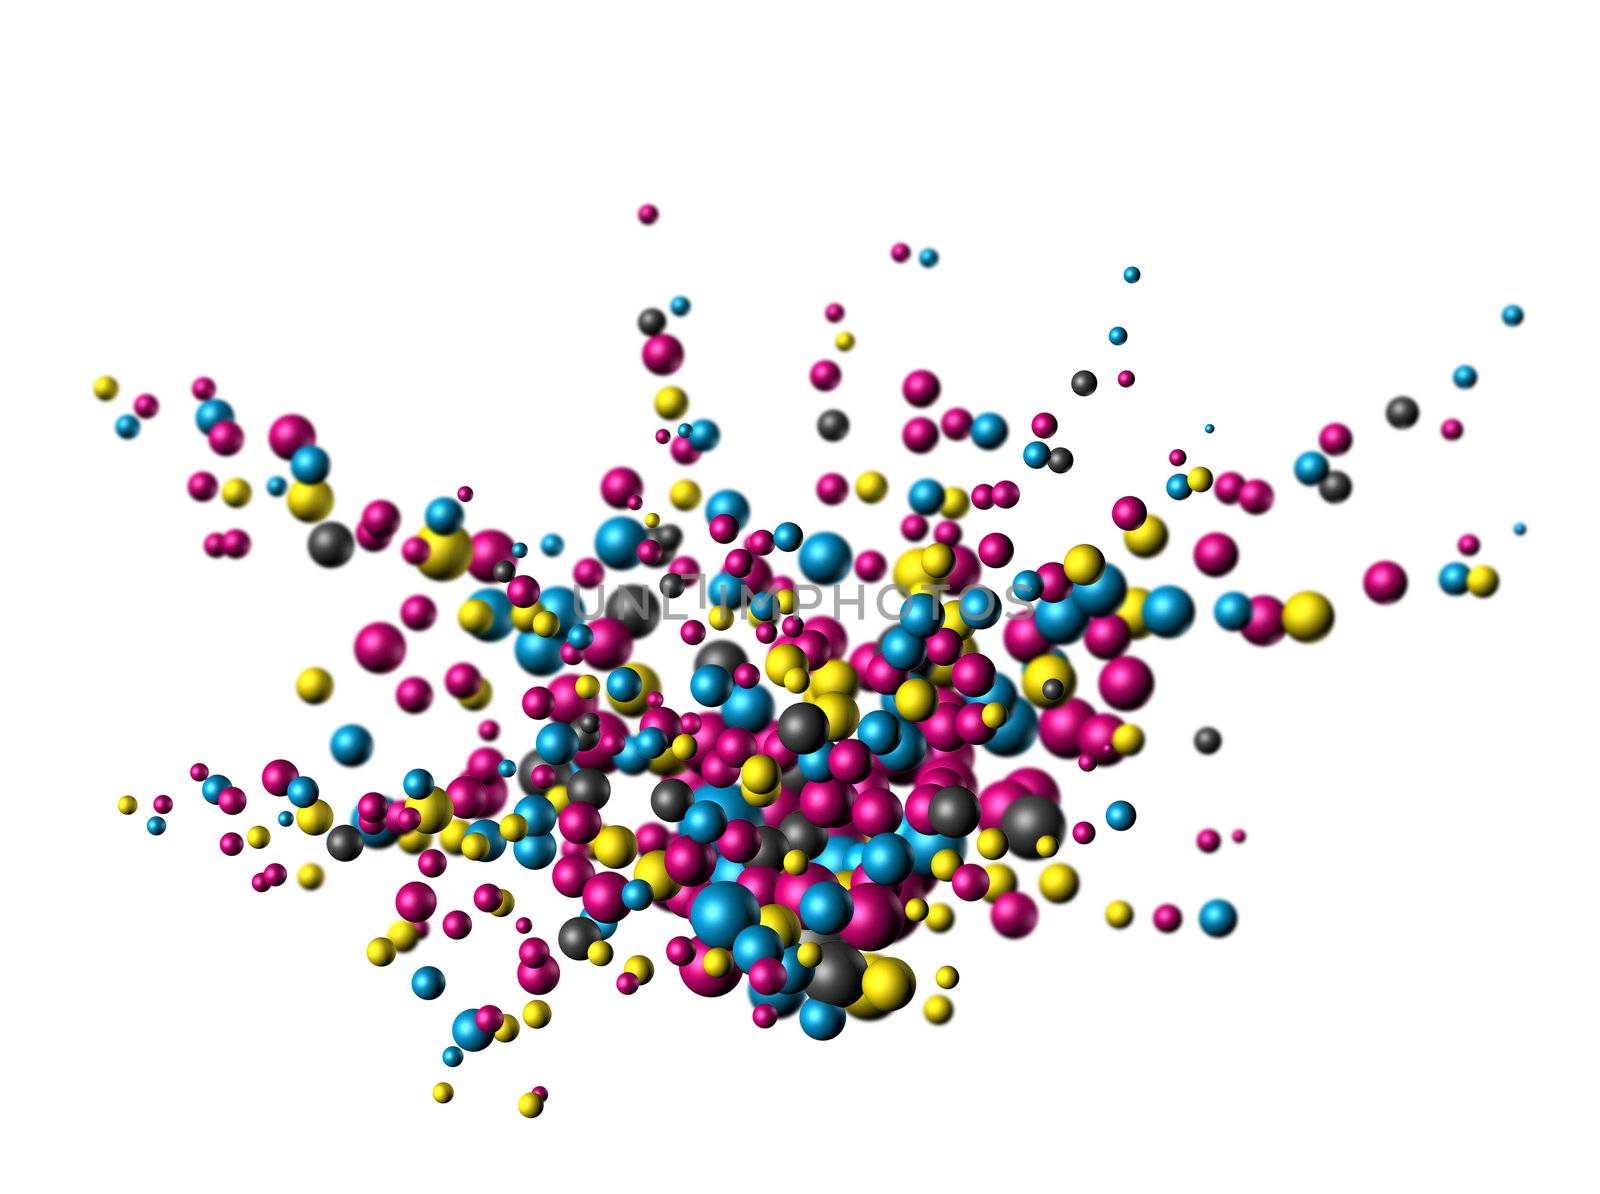 Cmyk colors atom nanoparticles exploding on white background isolated